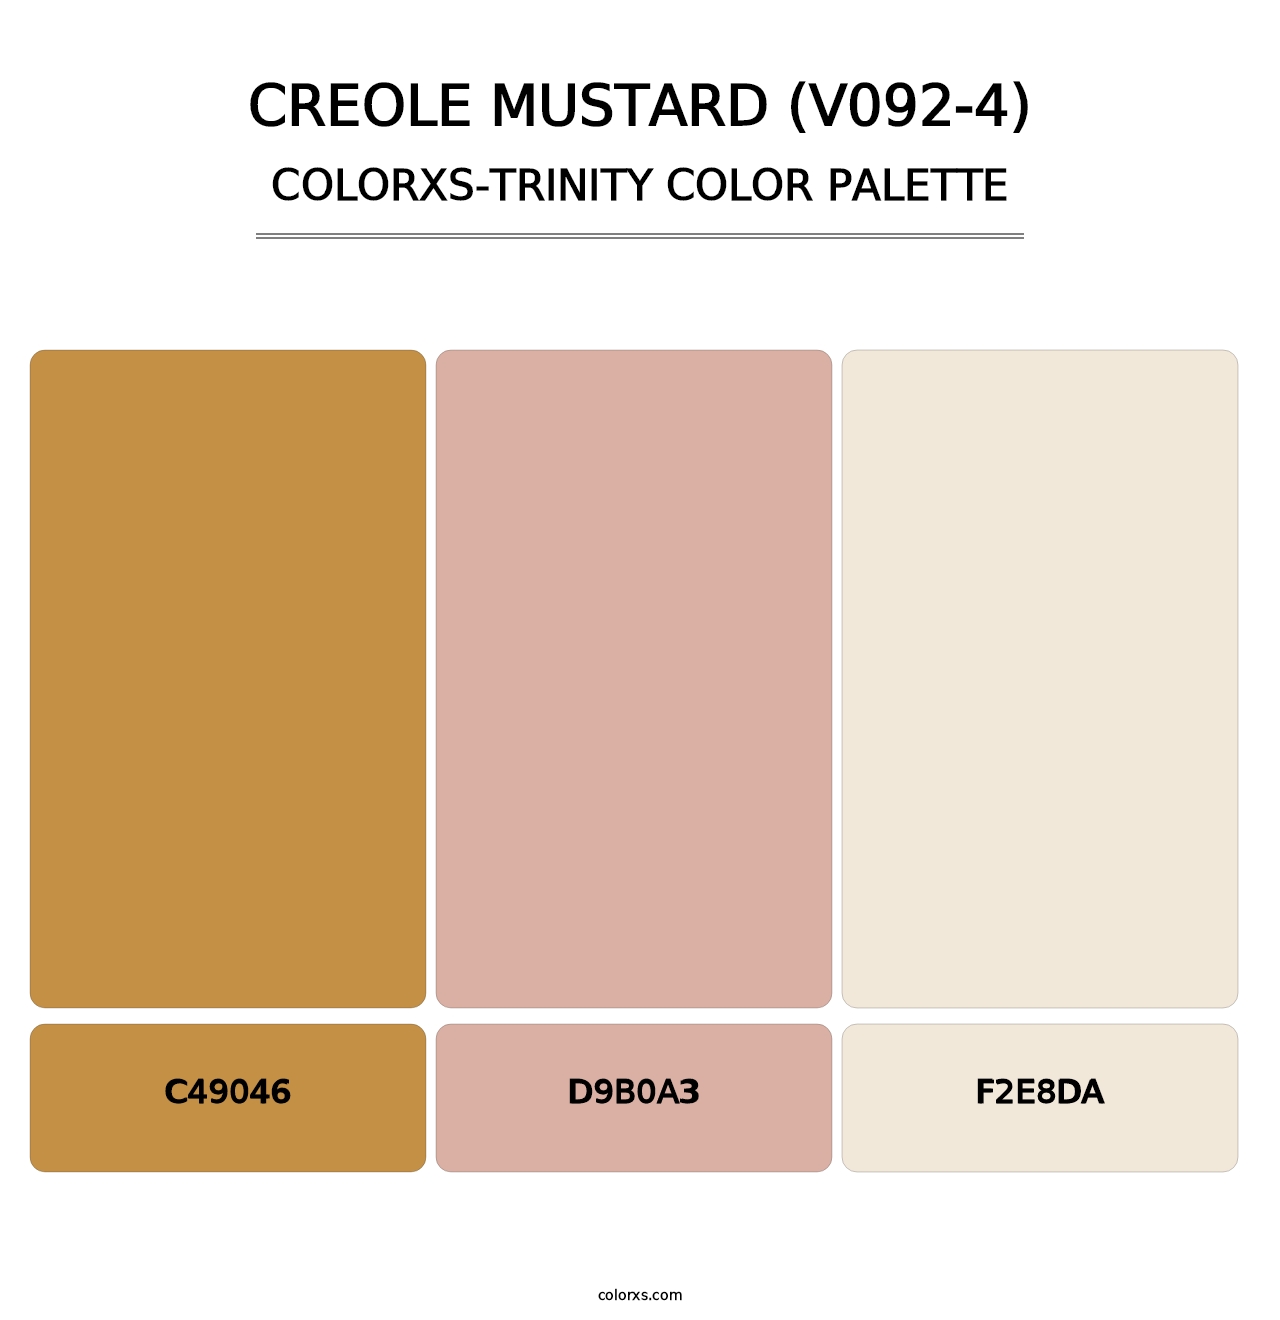 Creole Mustard (V092-4) - Colorxs Trinity Palette